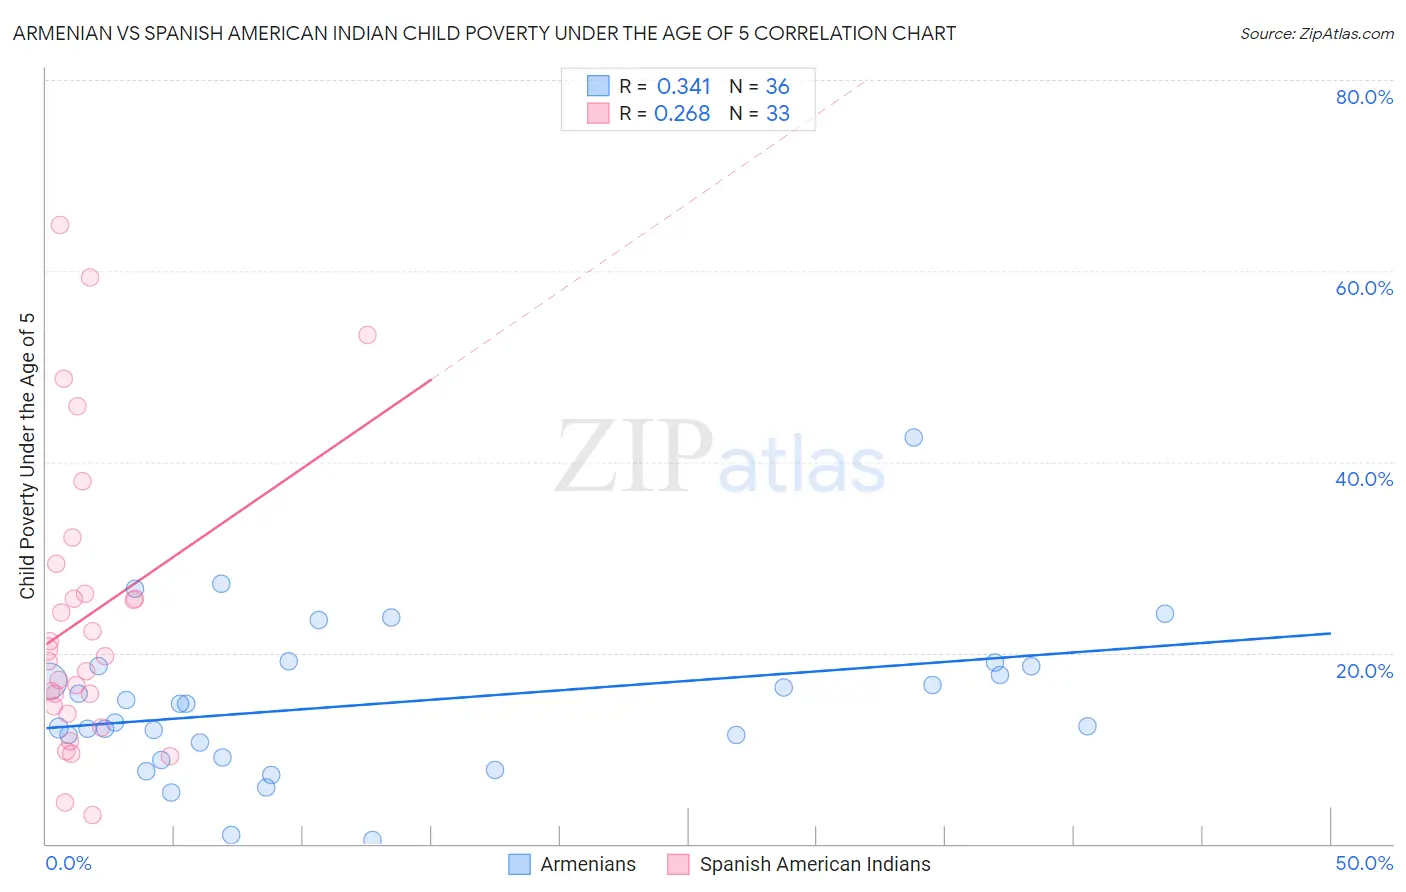 Armenian vs Spanish American Indian Child Poverty Under the Age of 5